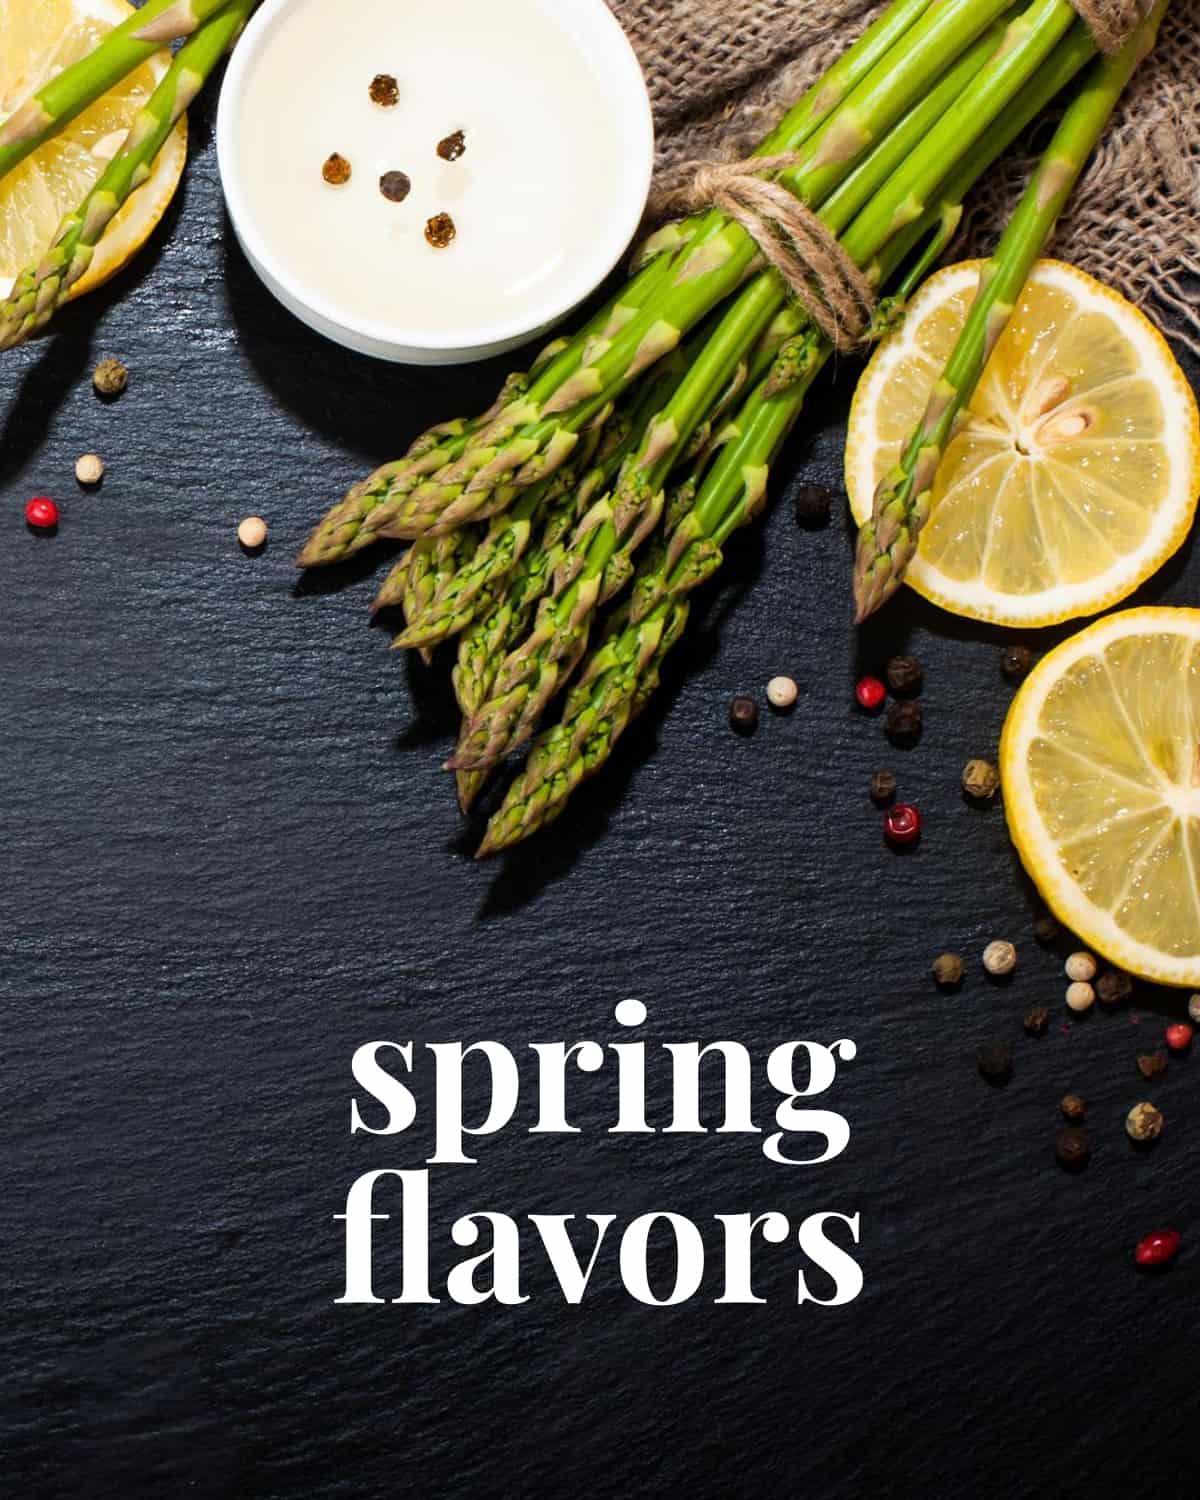 Lemons and asparagus on a black background with the words "spring flavors" at the bottom.